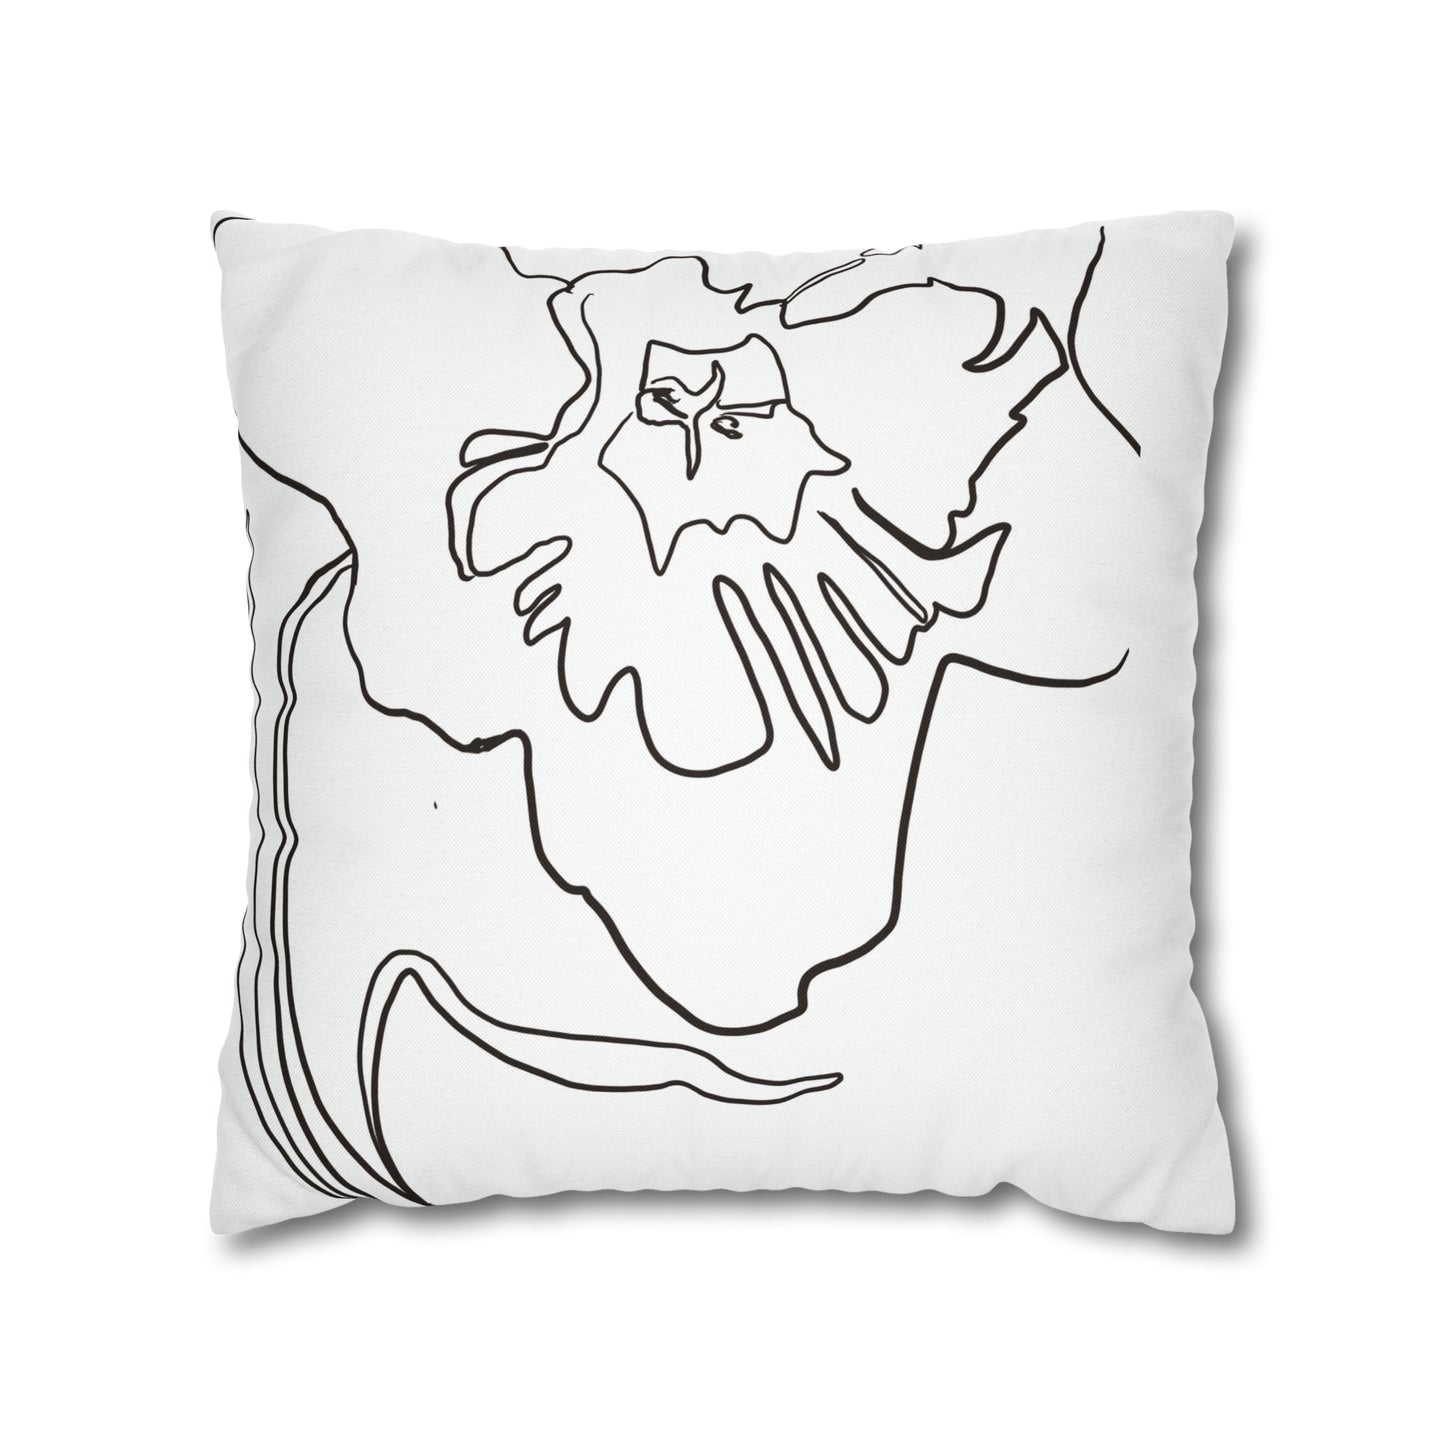 March Birth Flower Double-Sided Pillow Cover